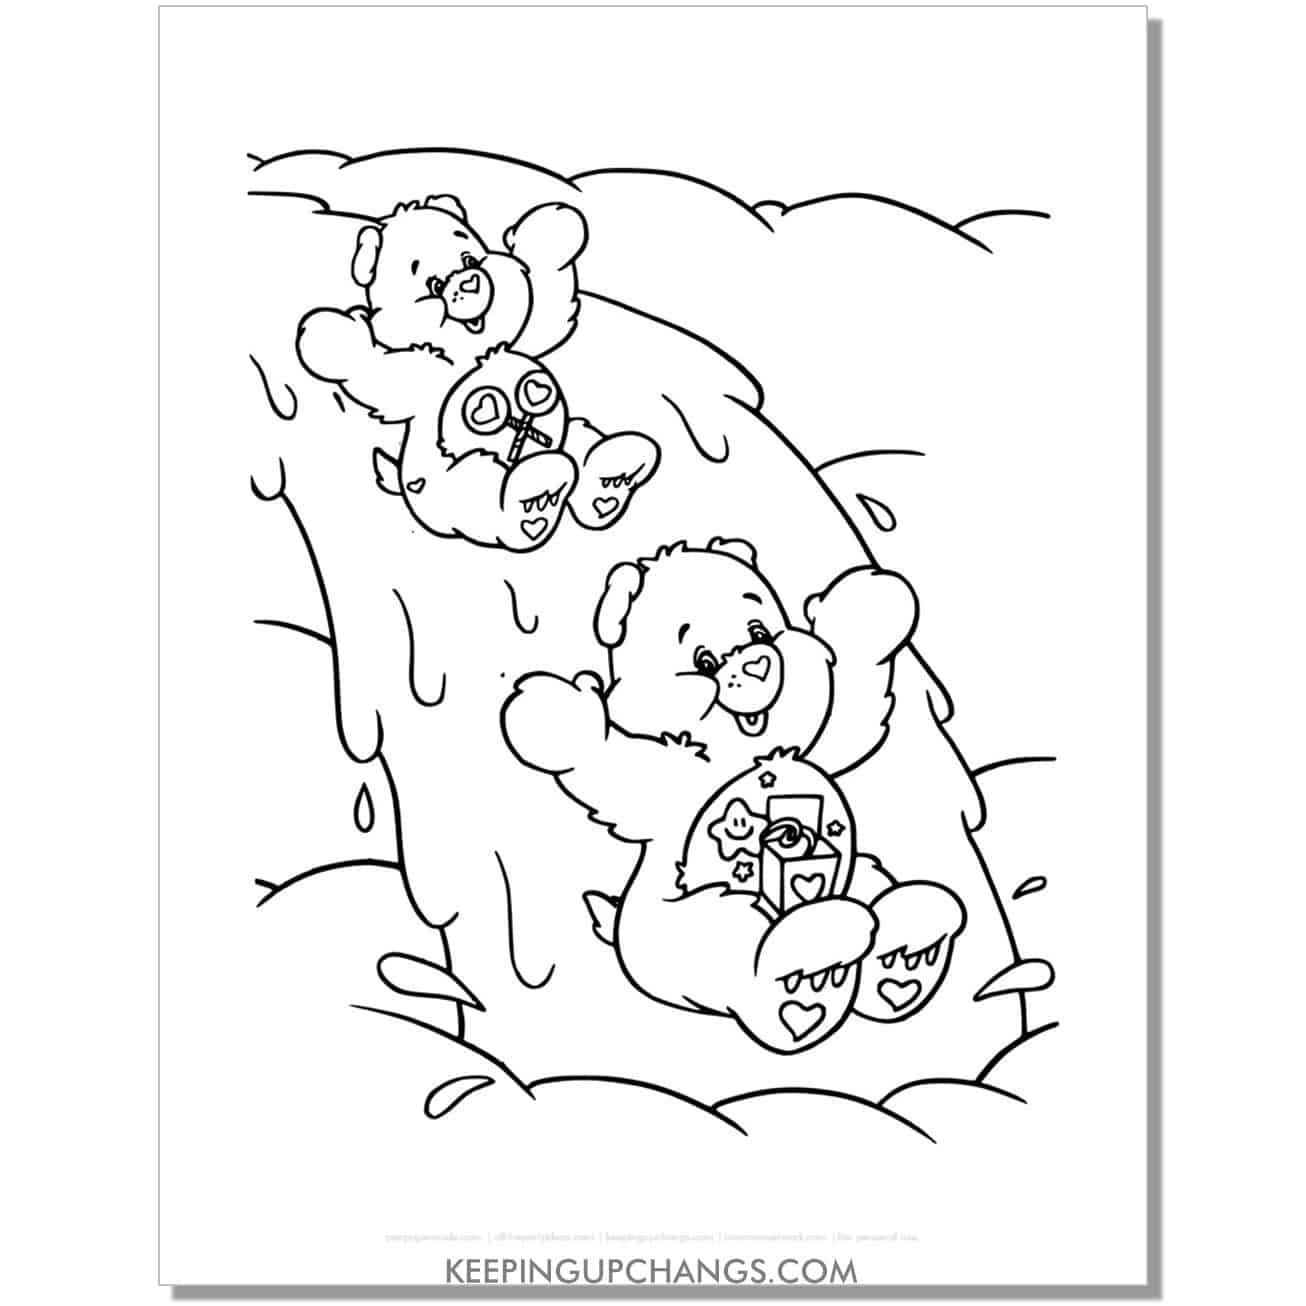 share, surprise bear sliding down waterfall care bear coloring page, sheet.